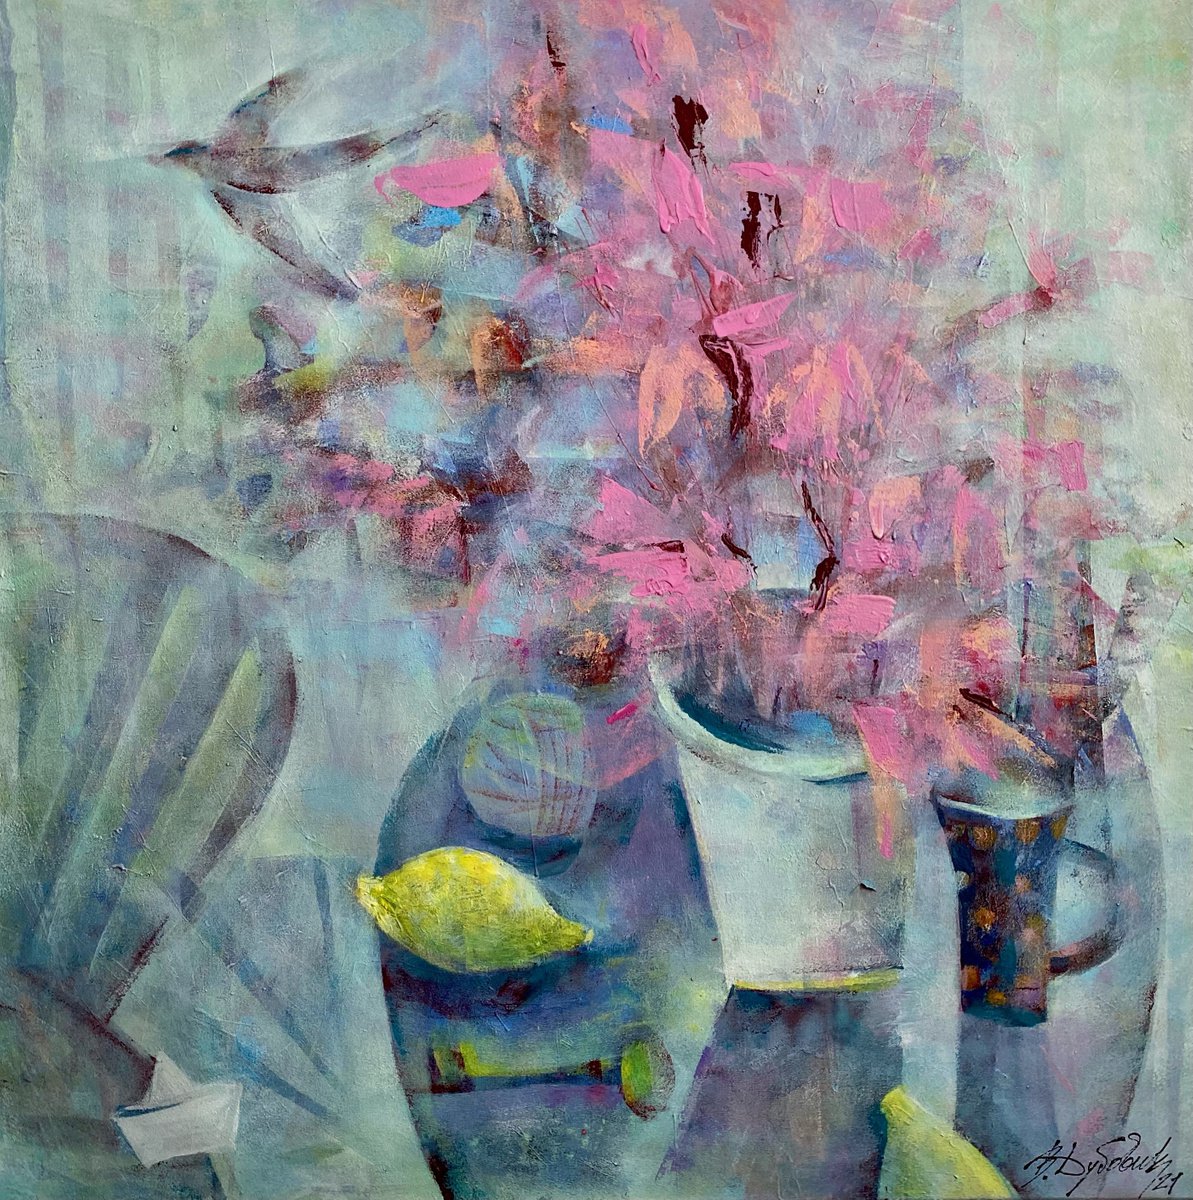 Waiting for Spring by Victoria Dubovyk